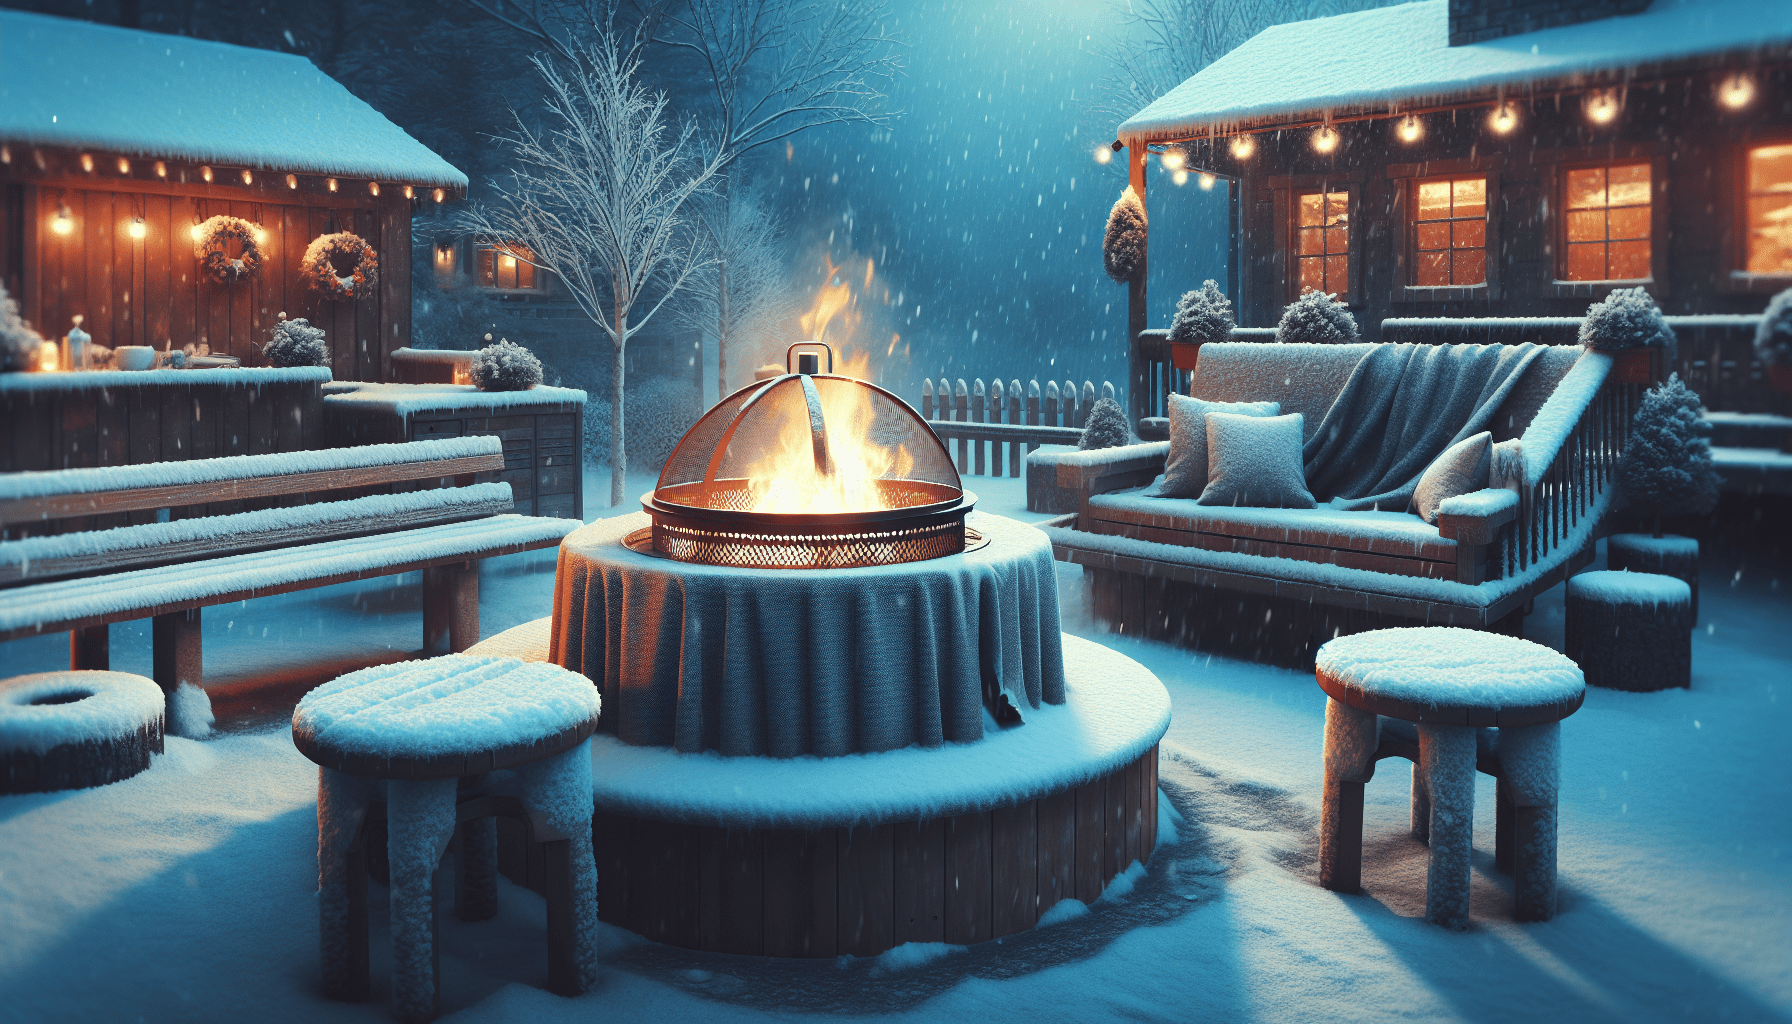 How Do I Winterize My Propane Fire Pit For Colder Months?